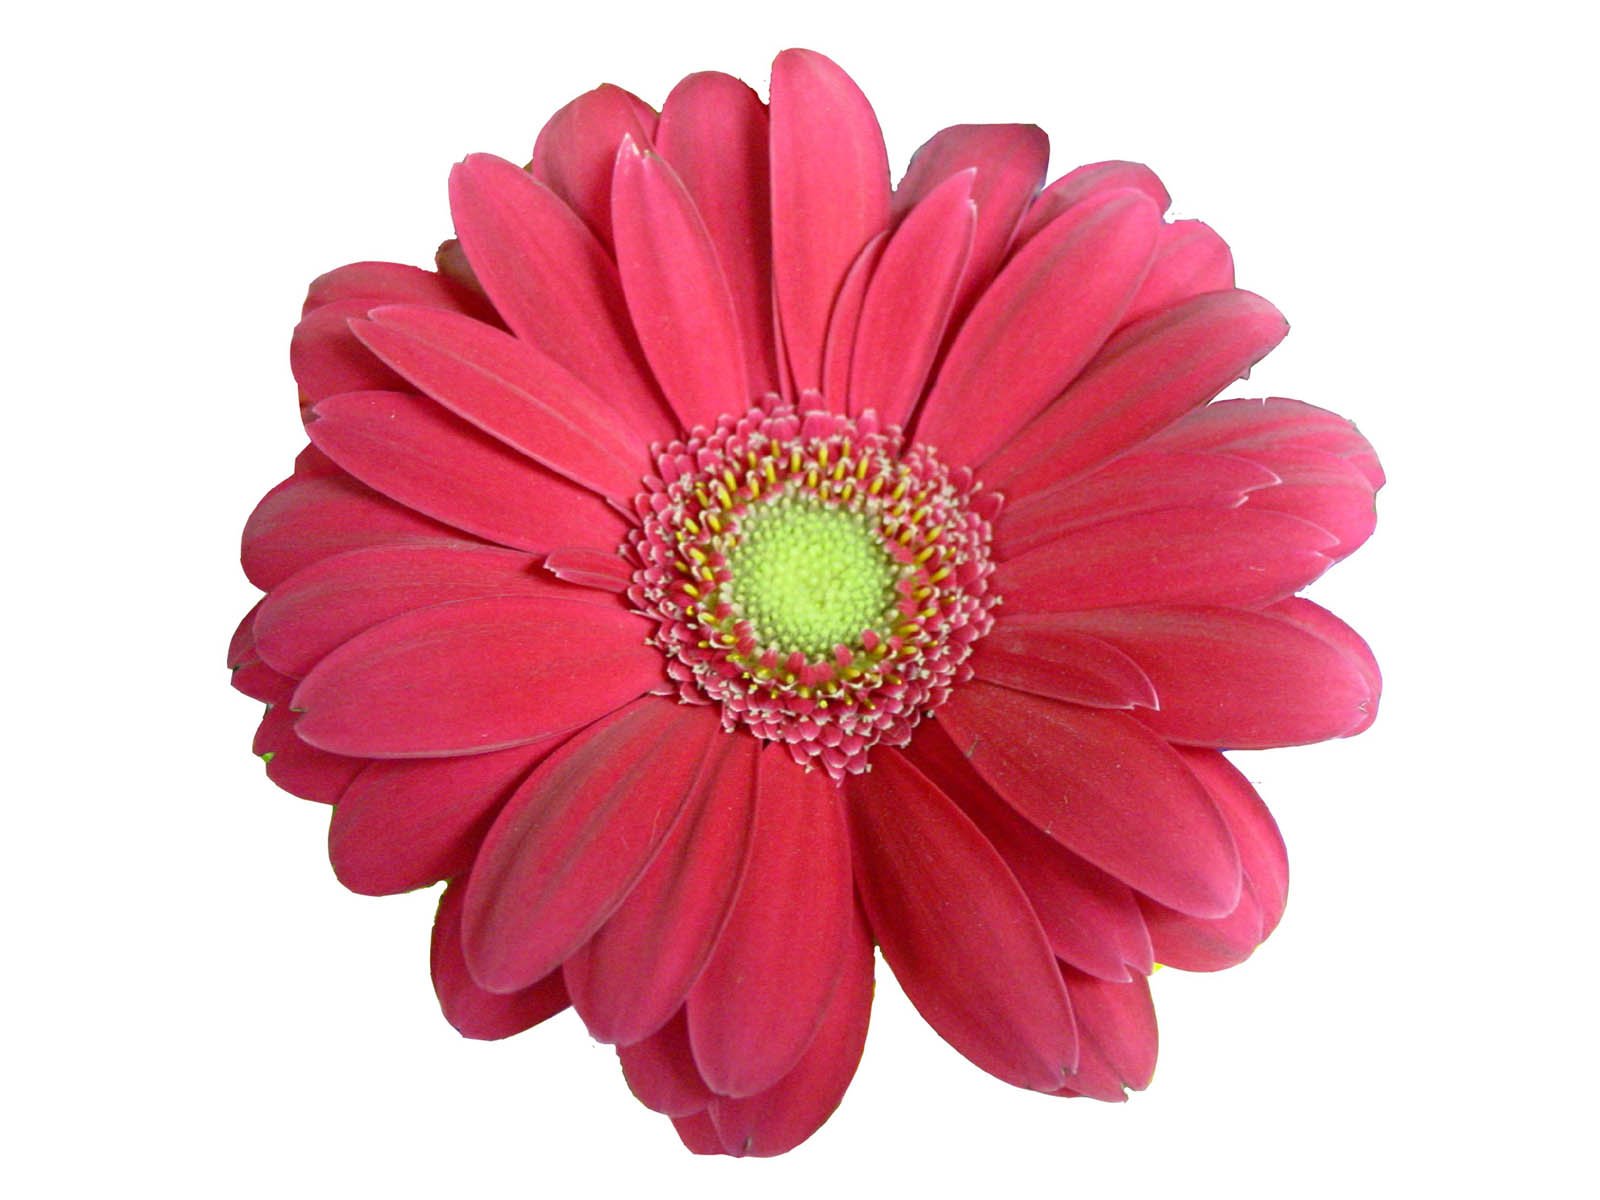 pictures of pink daisy pink daisy colorful flowers pictures pink daisy